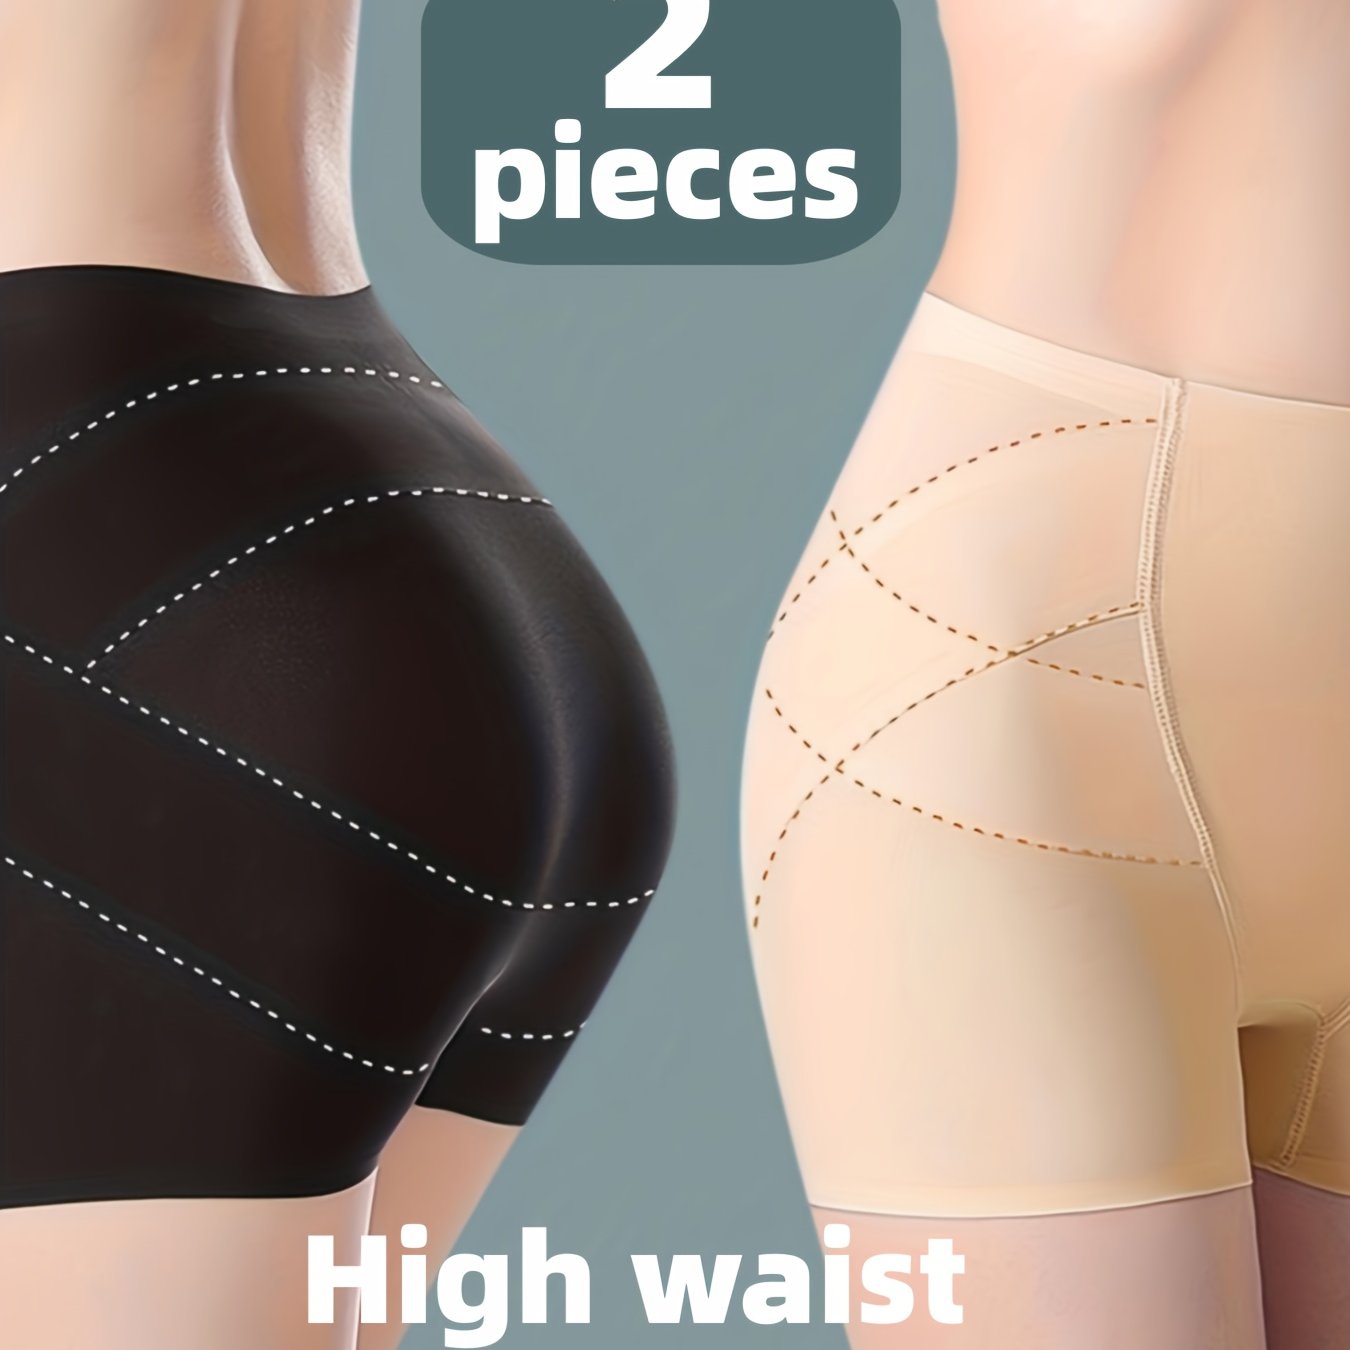 Cosway - Ambrace Comfi Thigh Shaper with Tummy Control